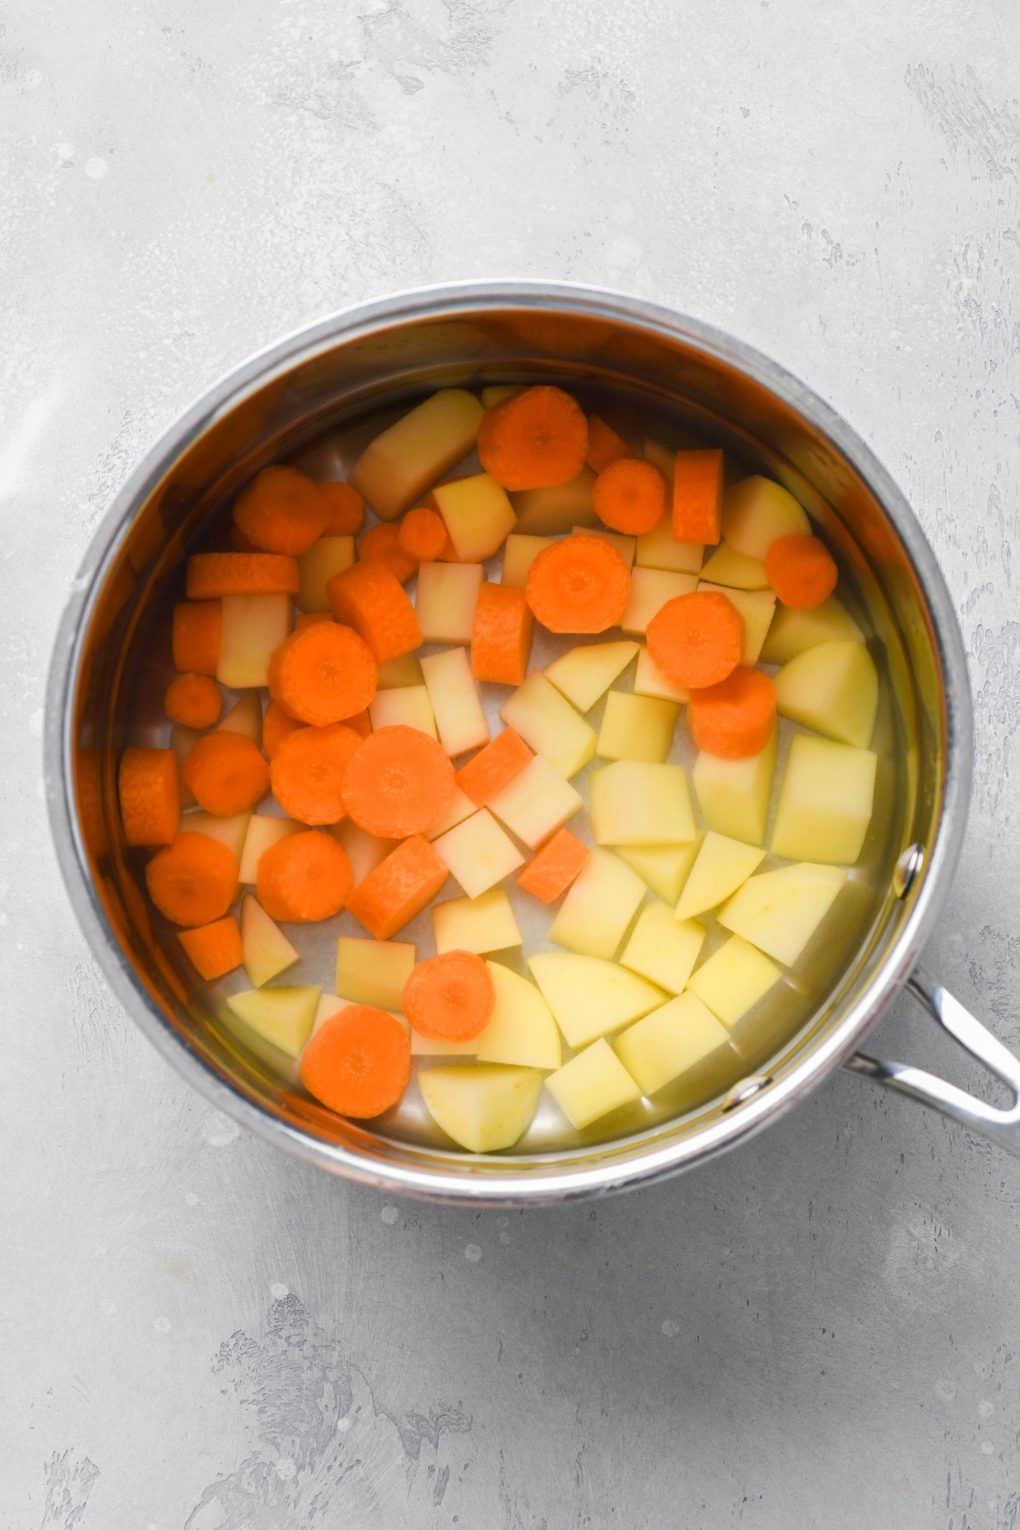 Image of cut potatoes and carrots in a small sauce pan filled with water. On a light colored background.